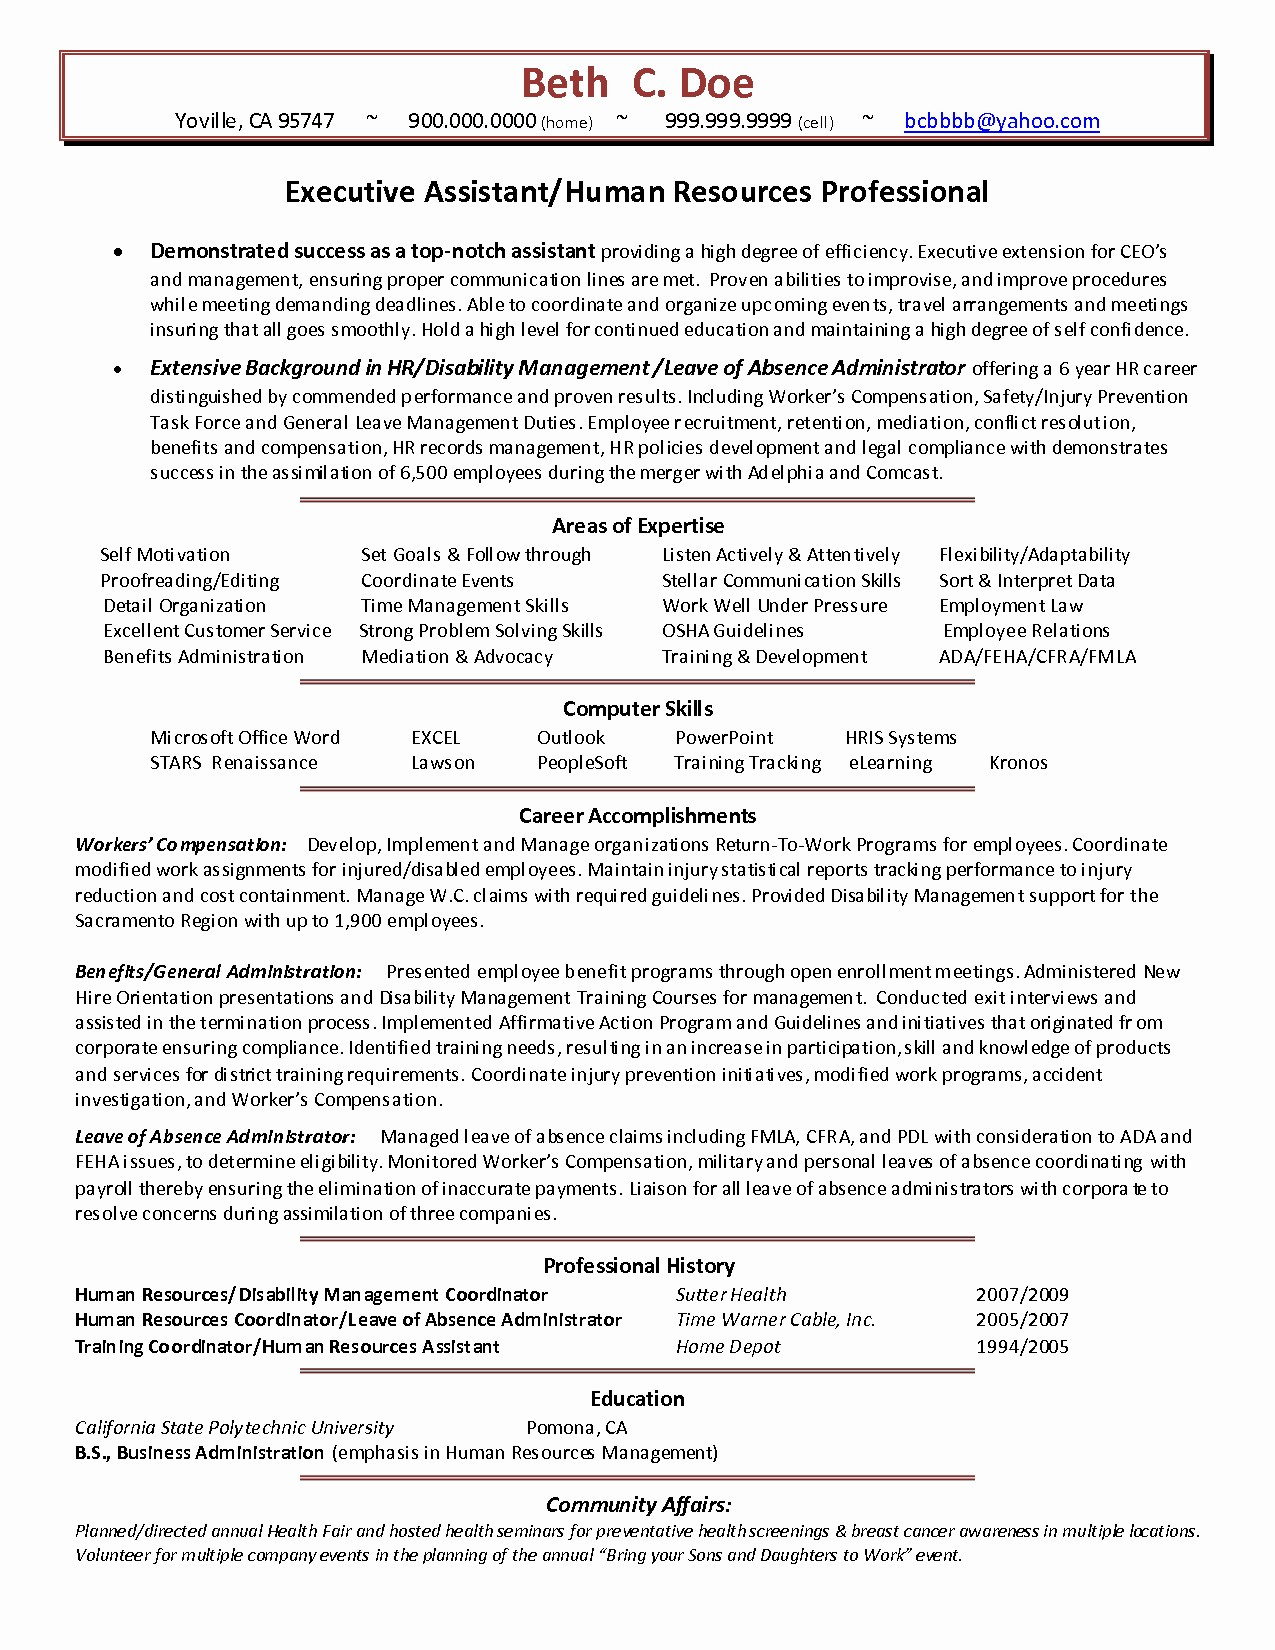 Human Resources Resume Entry Level Human Resources Resume Sample human resources resume|wikiresume.com